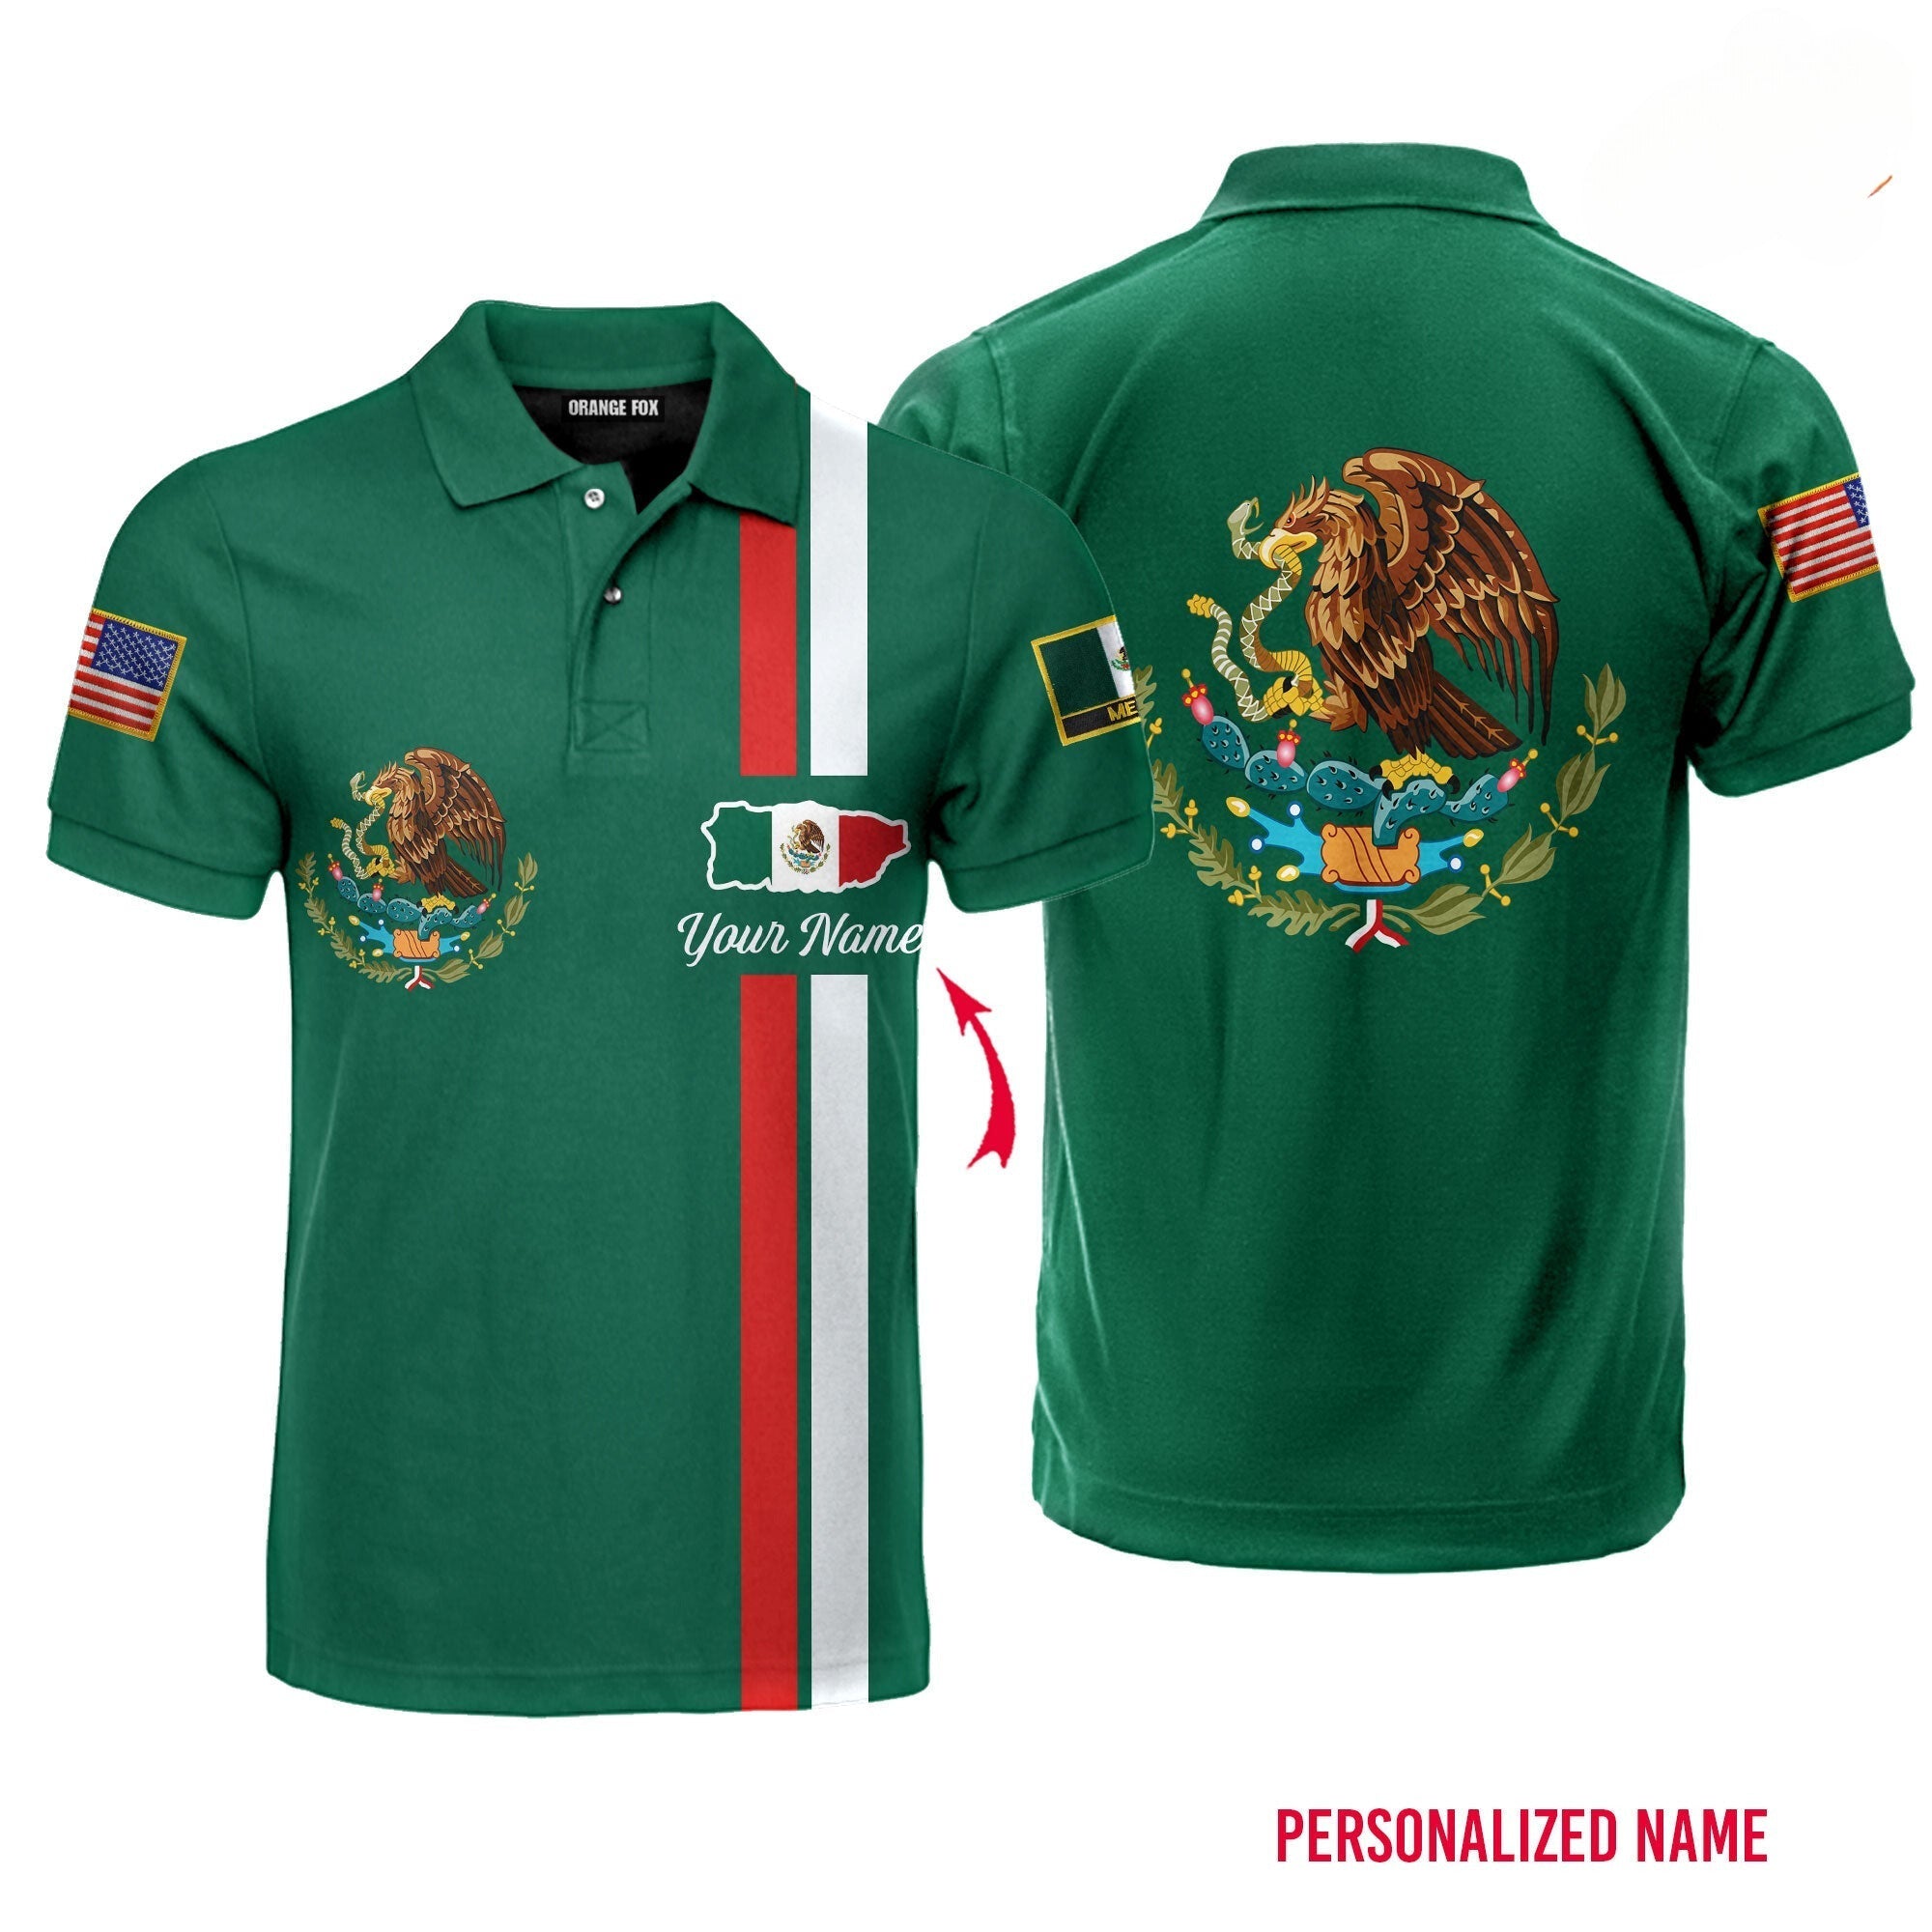 Personalized Mexican Green Polo Shirt For Men & Women